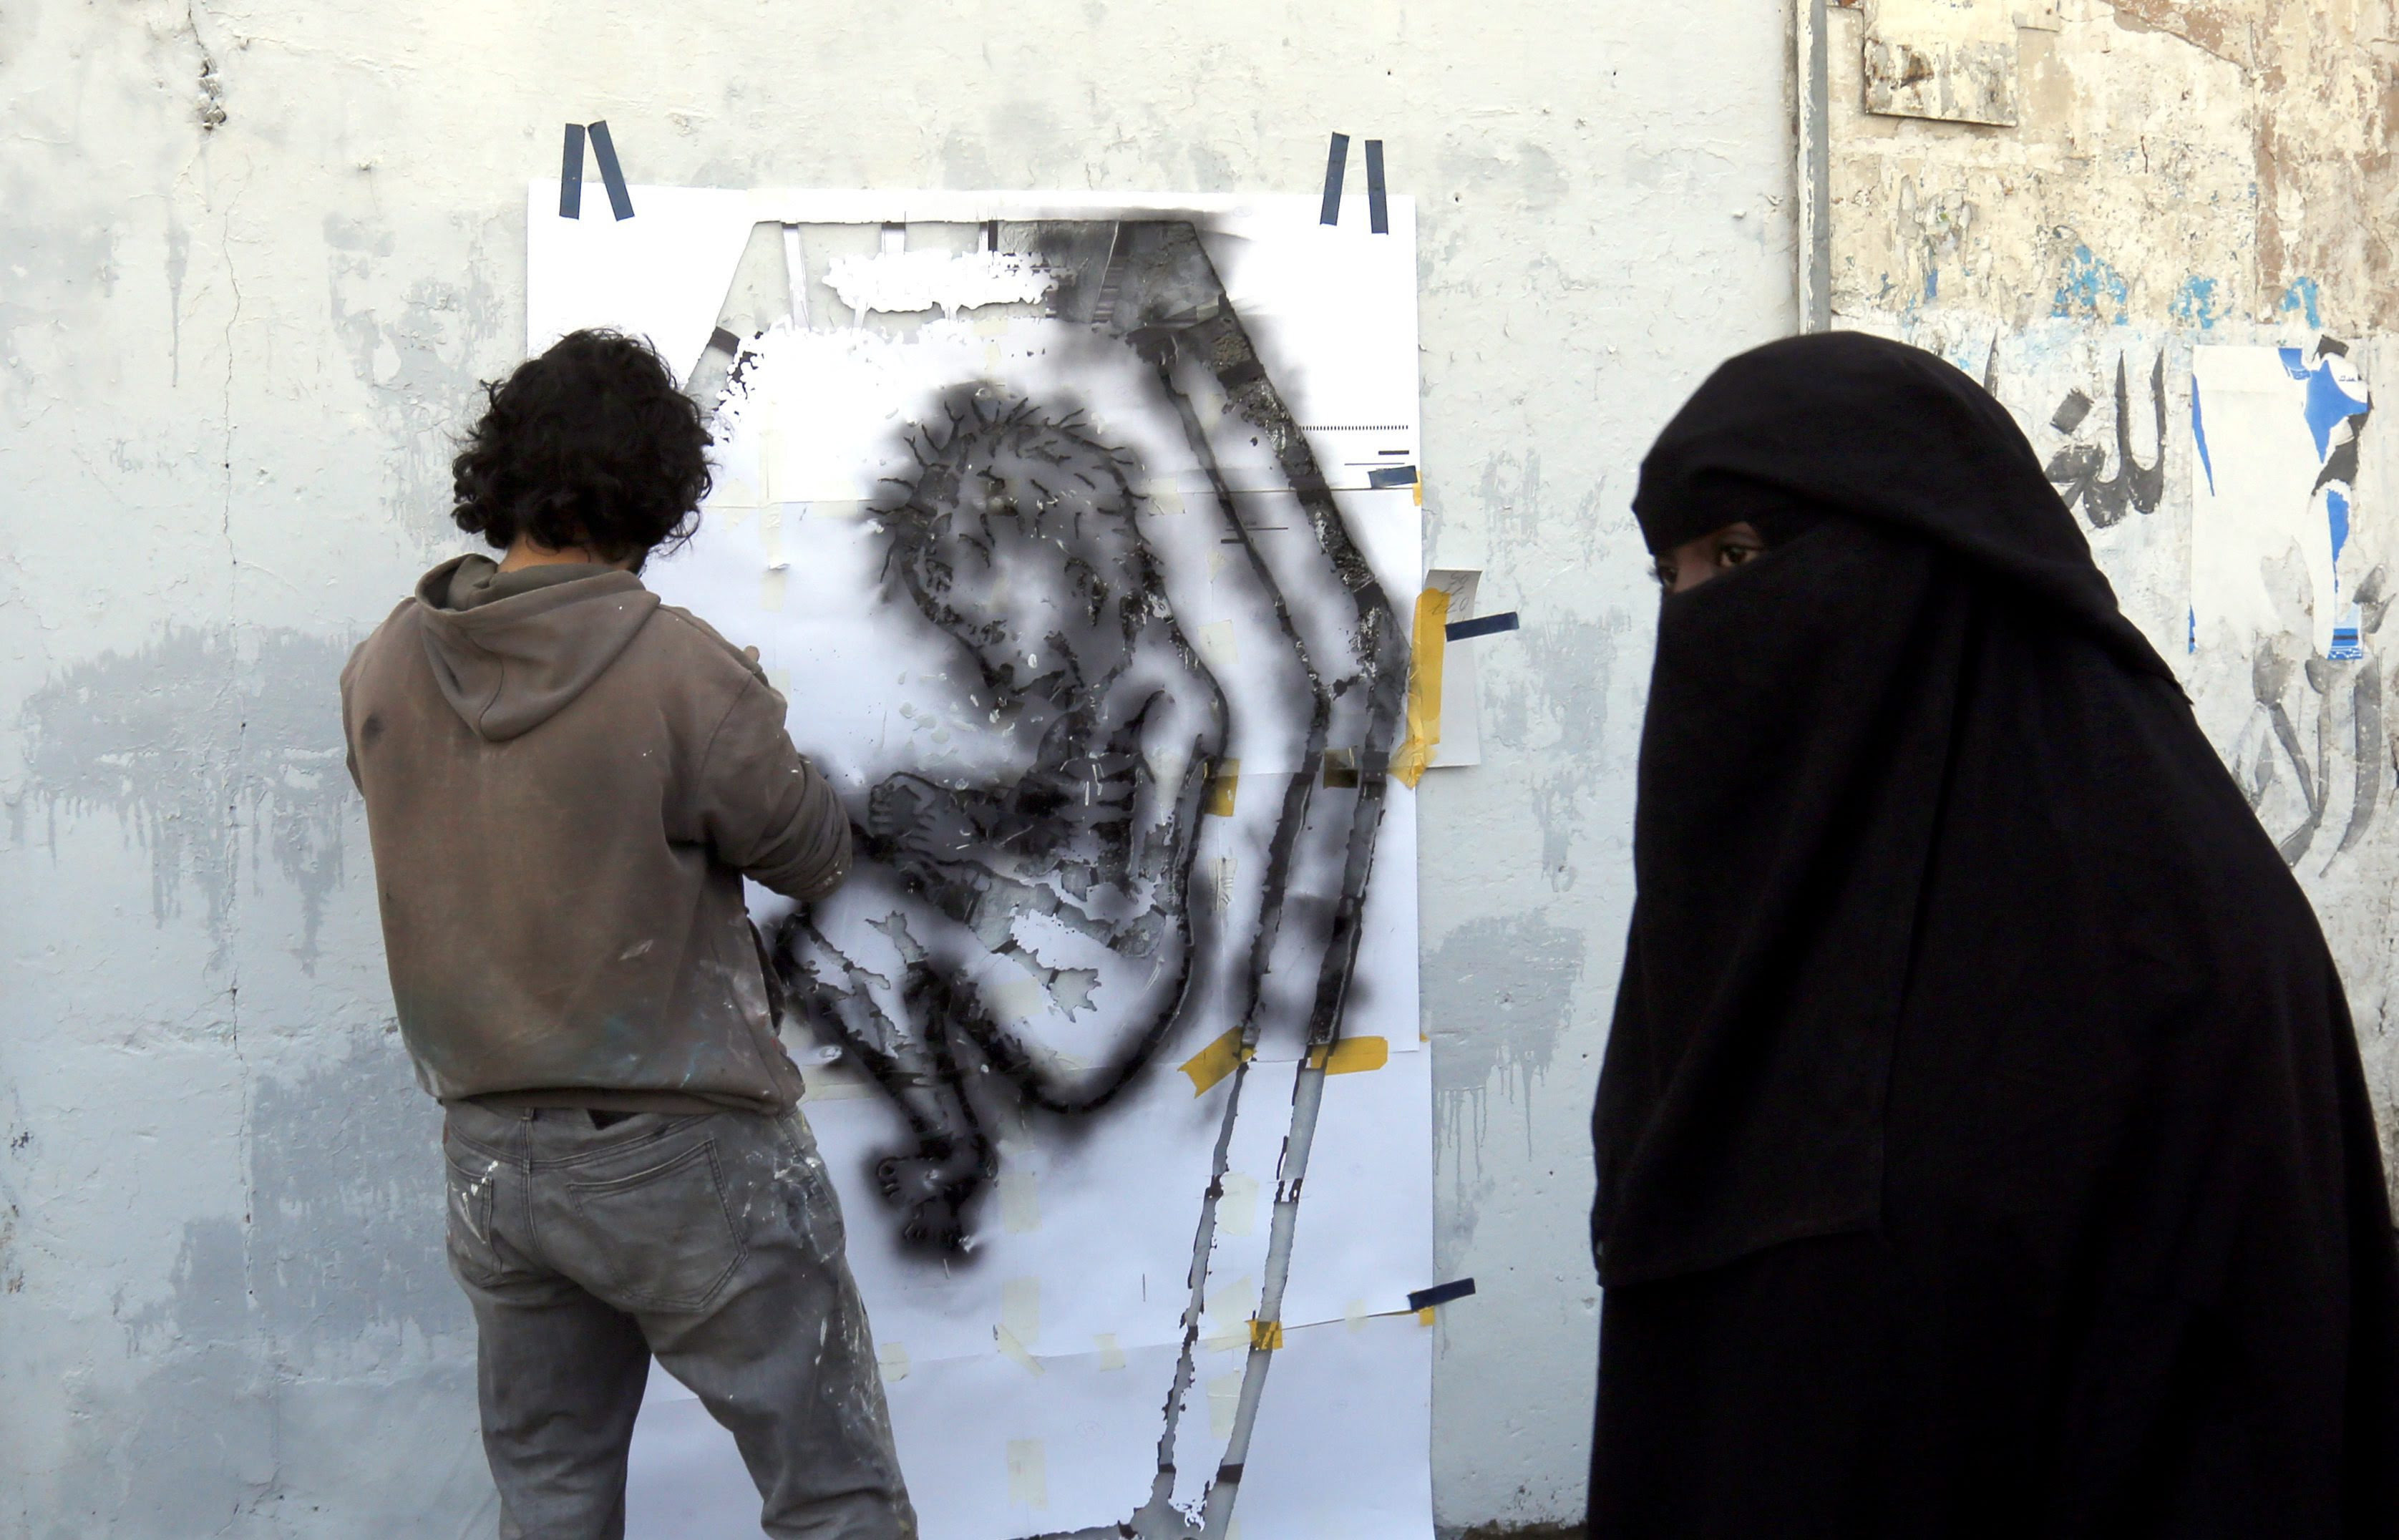 Yemeni artist spraying a graffiti on a wall in protest against the ongoing conflict and the worsening economic situation in the war-affected country, in Sanaâ€™a, Yemen, 20 October 2016. According to reports, since March 2015, ongoing conflict and the Saudi-led airstrike campaign in Yemen have left 21.2 million - 82 percent of Yemenâ€™s population - in dire need of humanitarian aid, including 9.9 million children.  EPA/YAHYA ARHAB